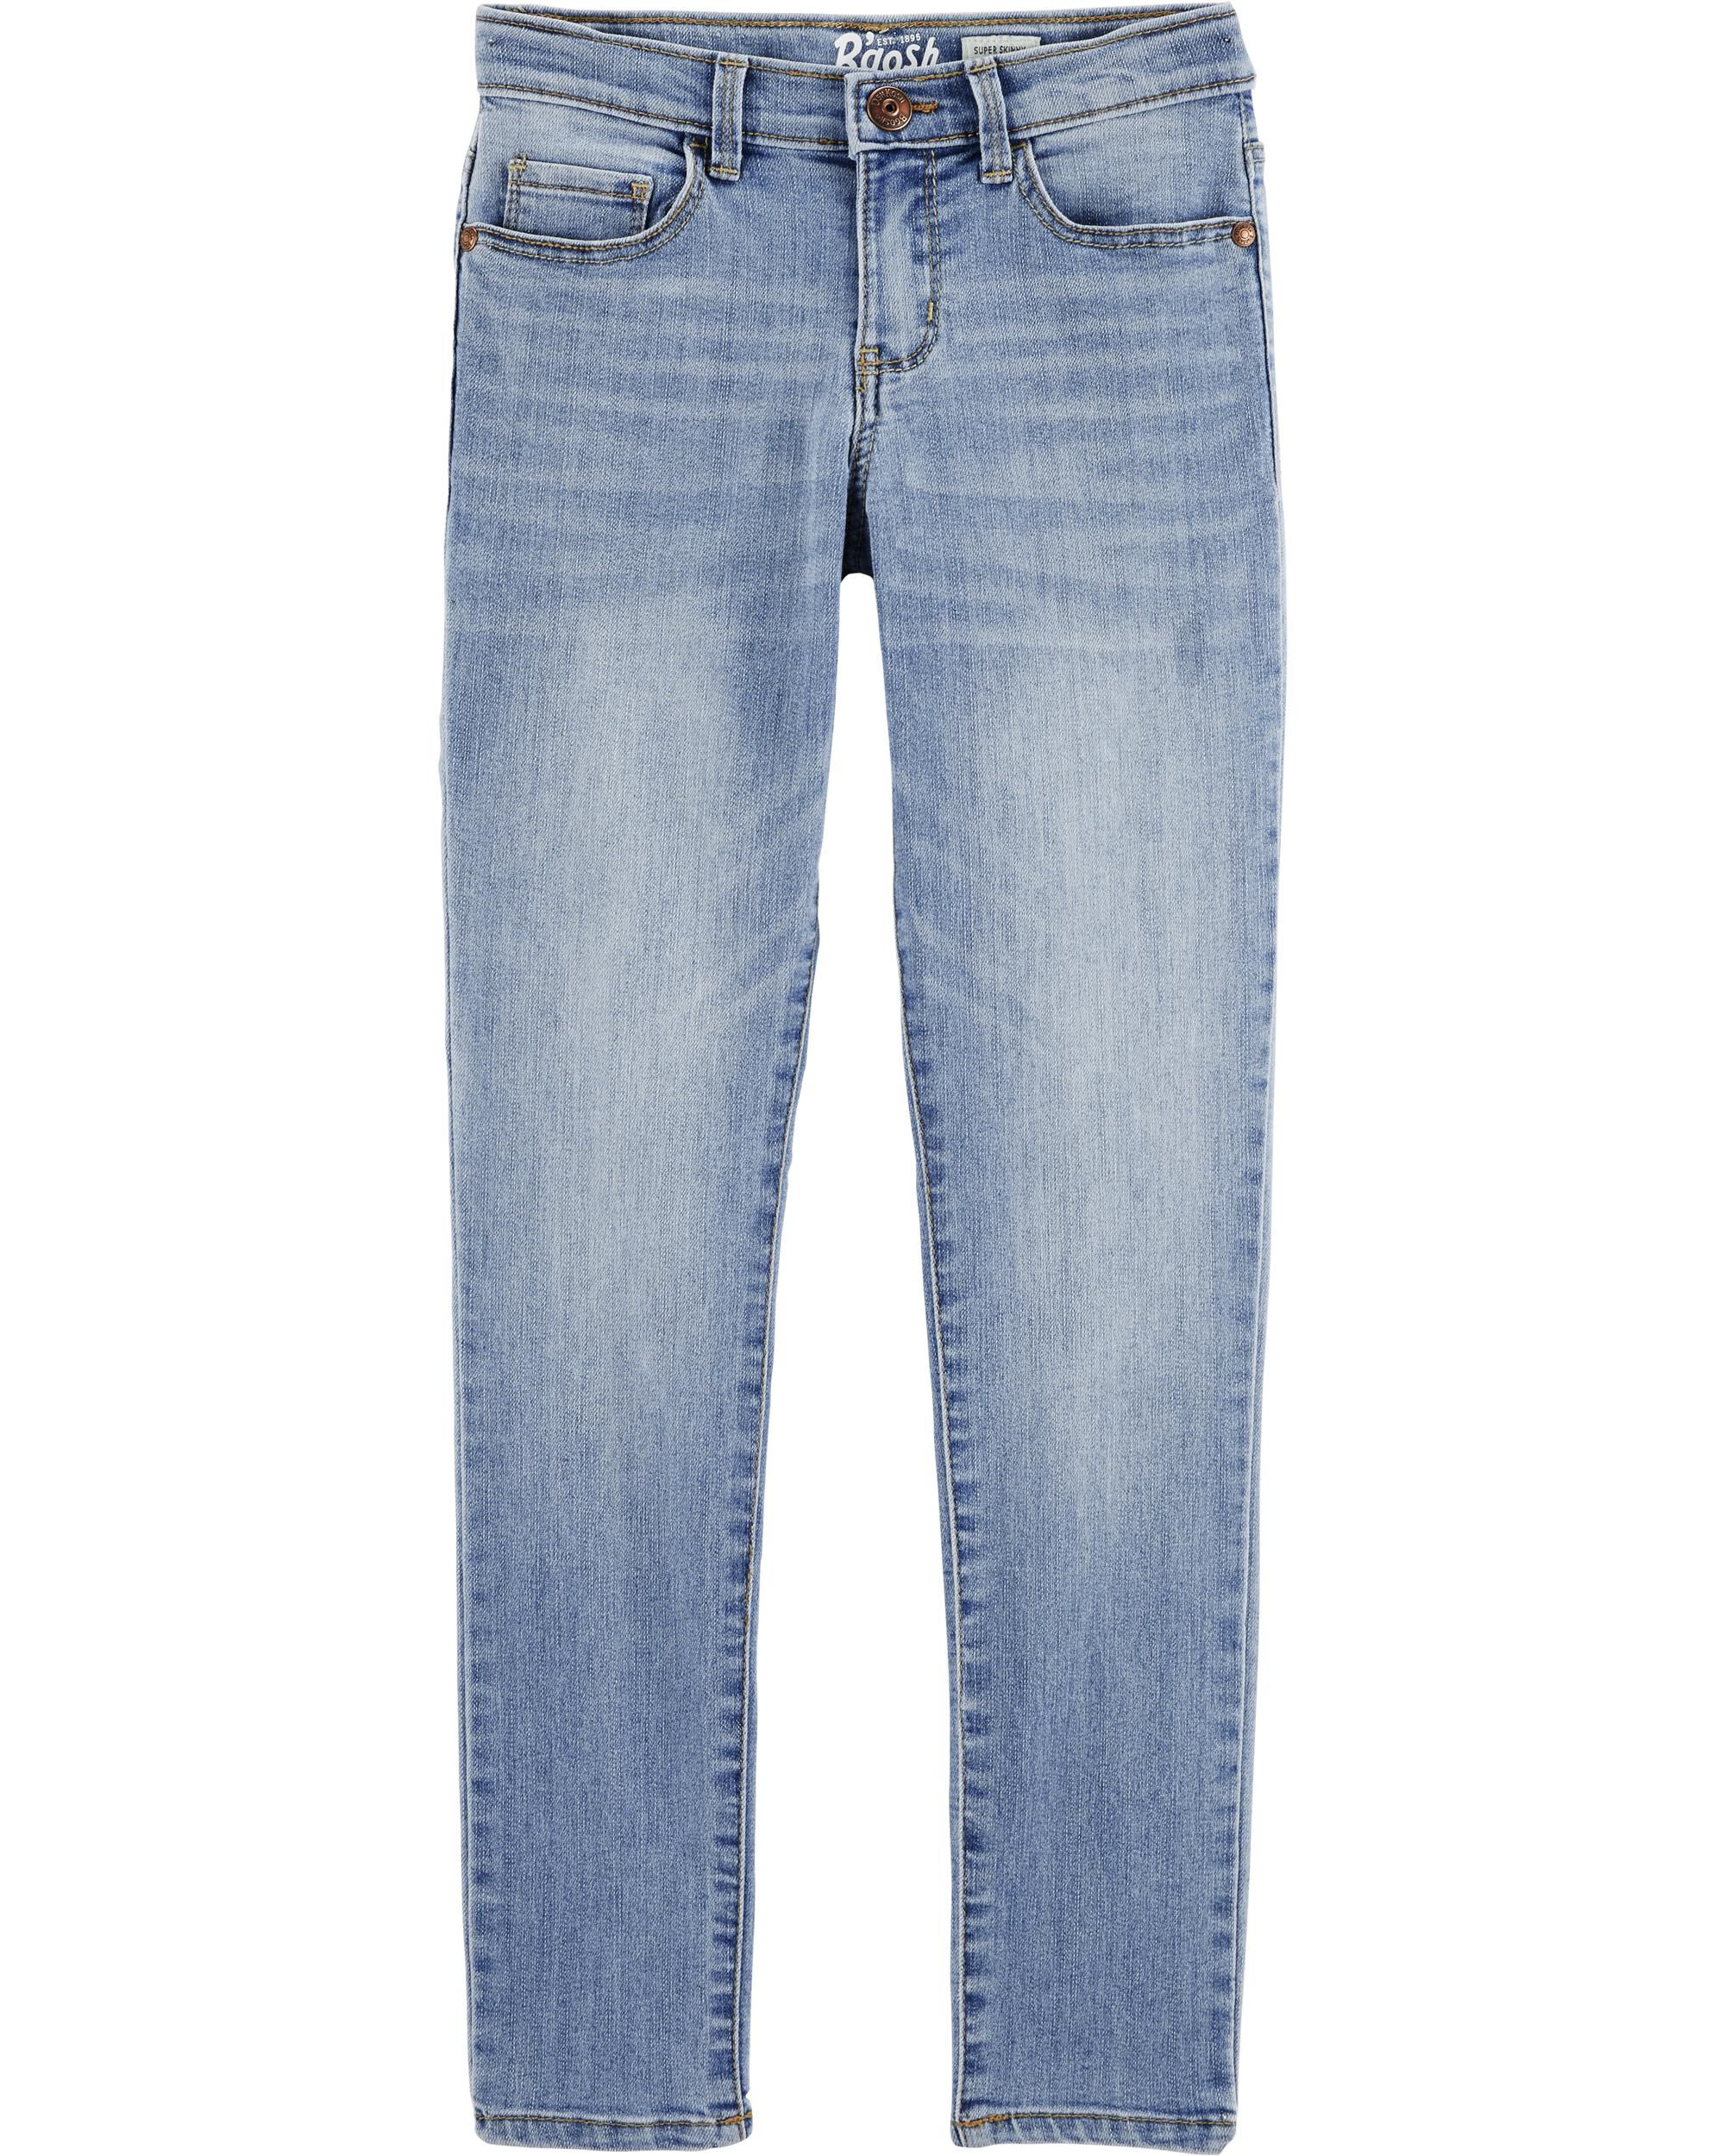 Carters Super Skinny Jeans in Winchester Wash